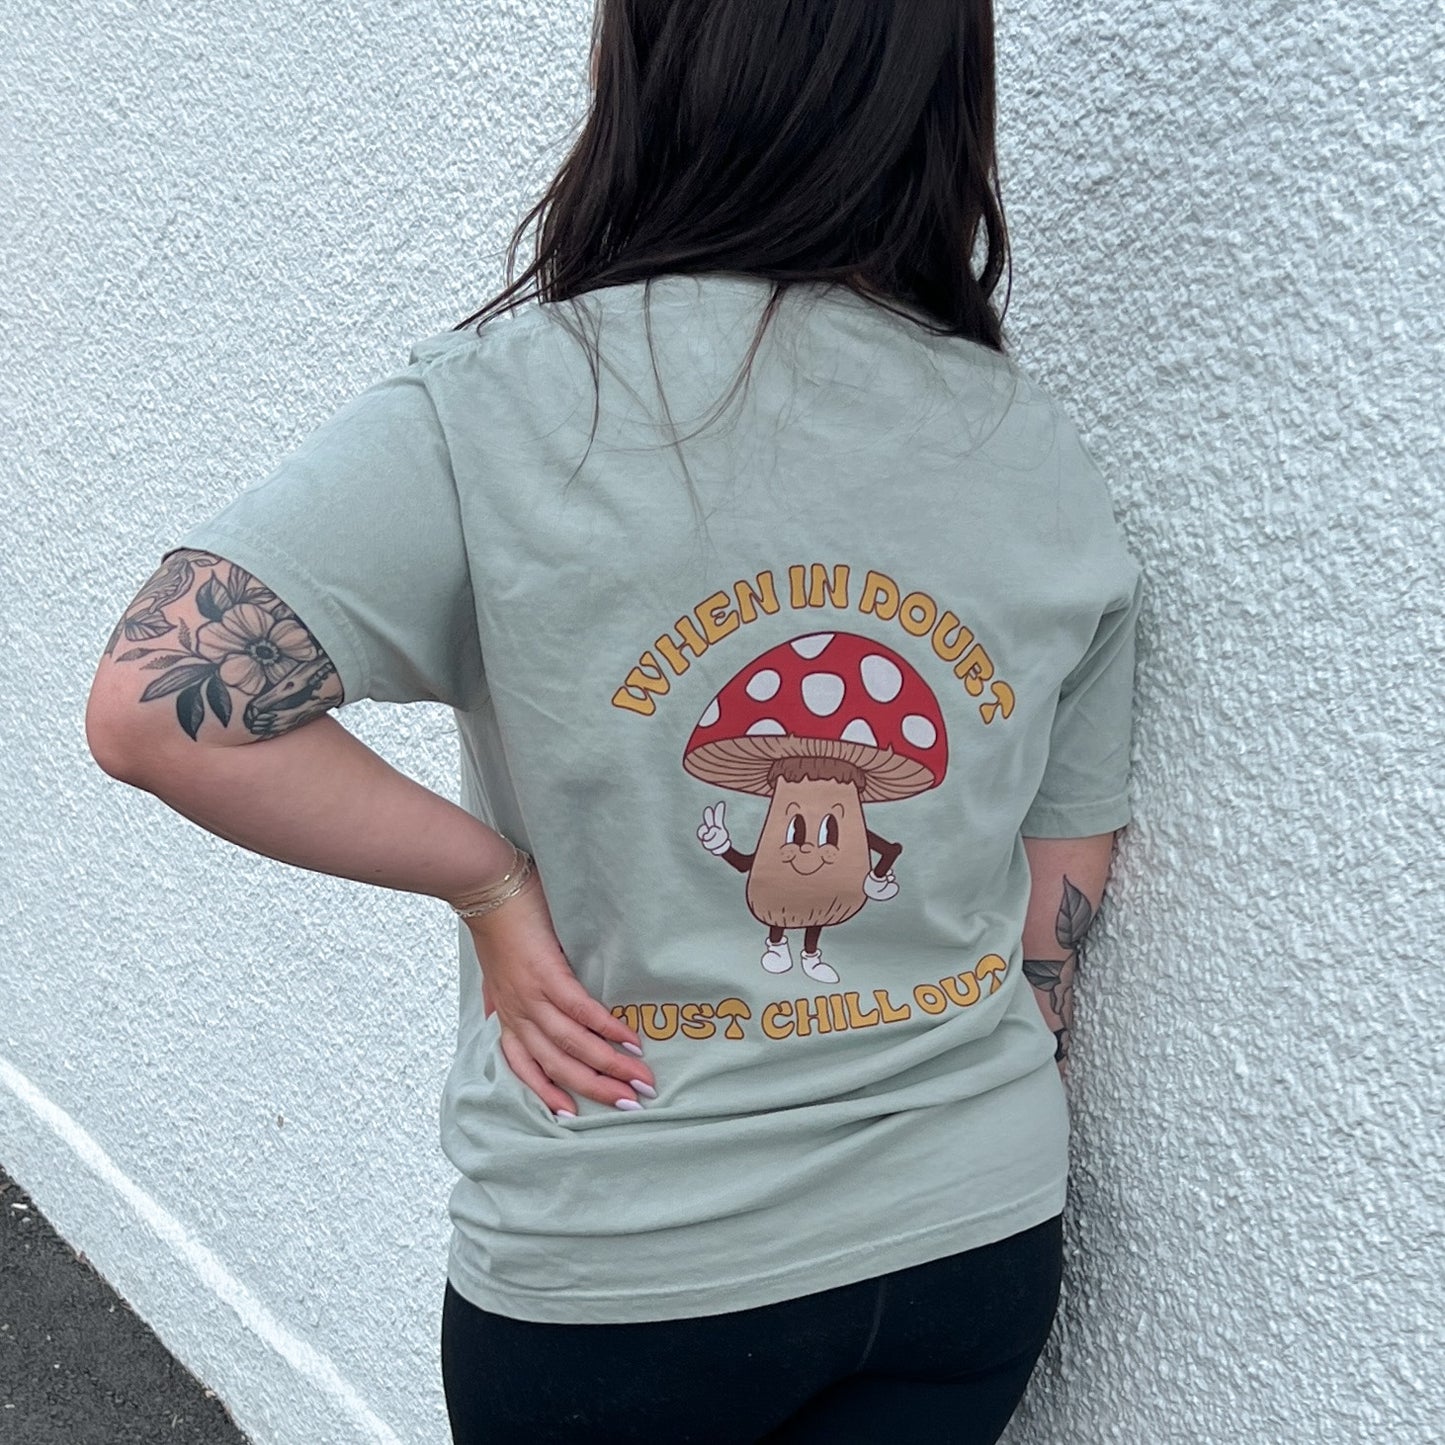 When In Doubt, Just Chill Out Mushroom TShirt